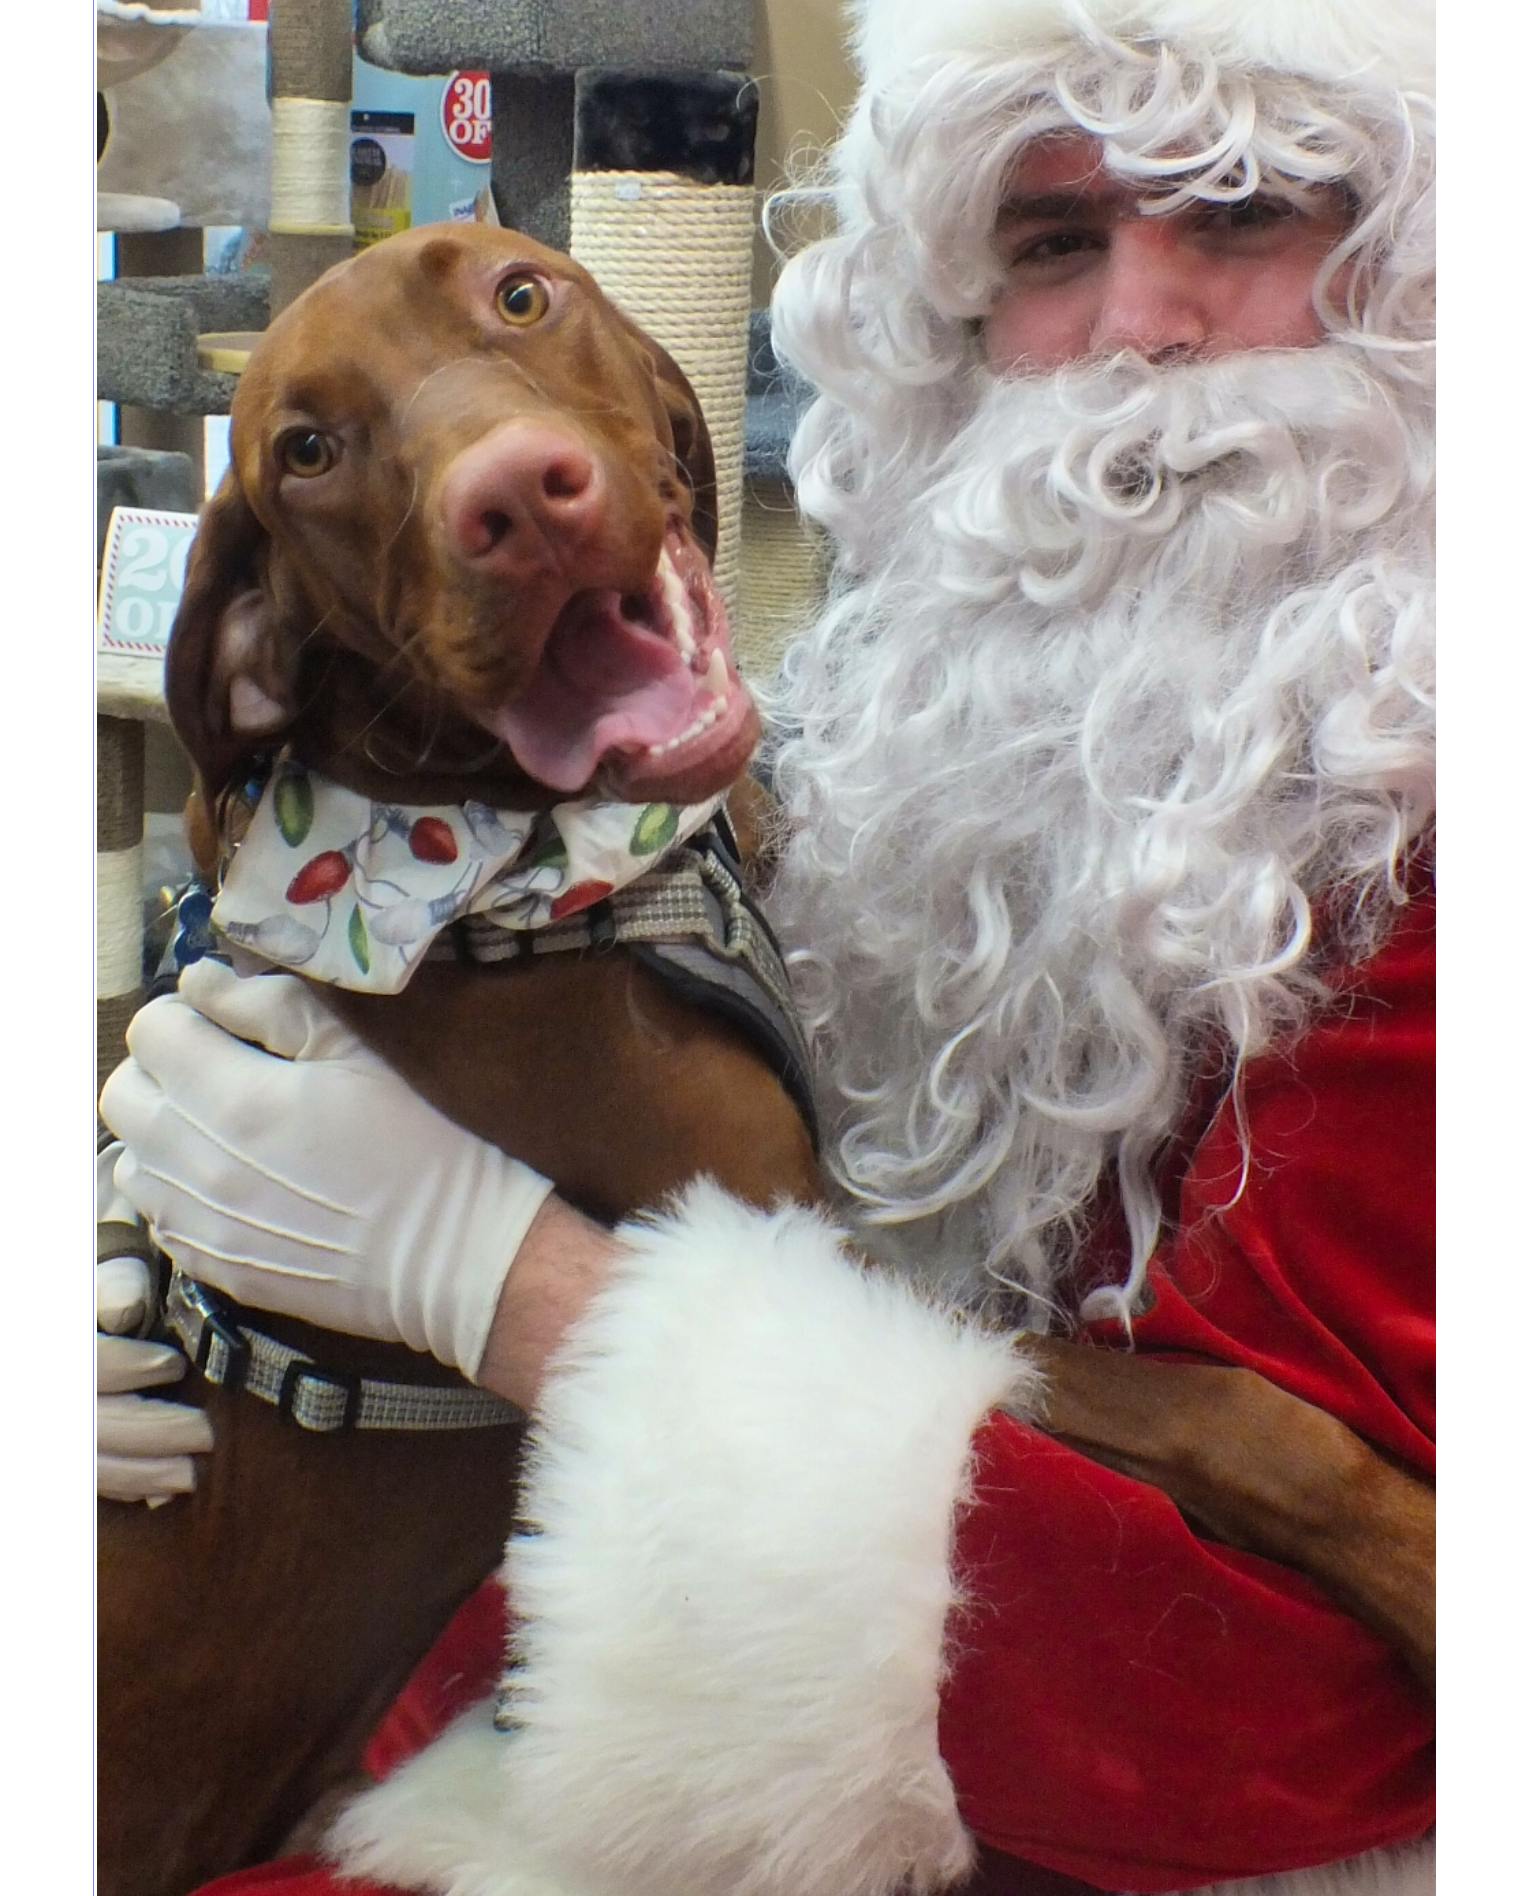 Carolyn Langley sent this adorable photo. She wrote, "Last year Sherlock was so excited to meet Santa, and tell him how good he had been, unfortunately this year he’ll have to send in his wish list by Paw Mail. Sherlock is a Hungarian Vizsla, who lives with his folks Carolyn and Russ in Port Hawkesbury. We want to wish everyone a very merry and safe holiday."